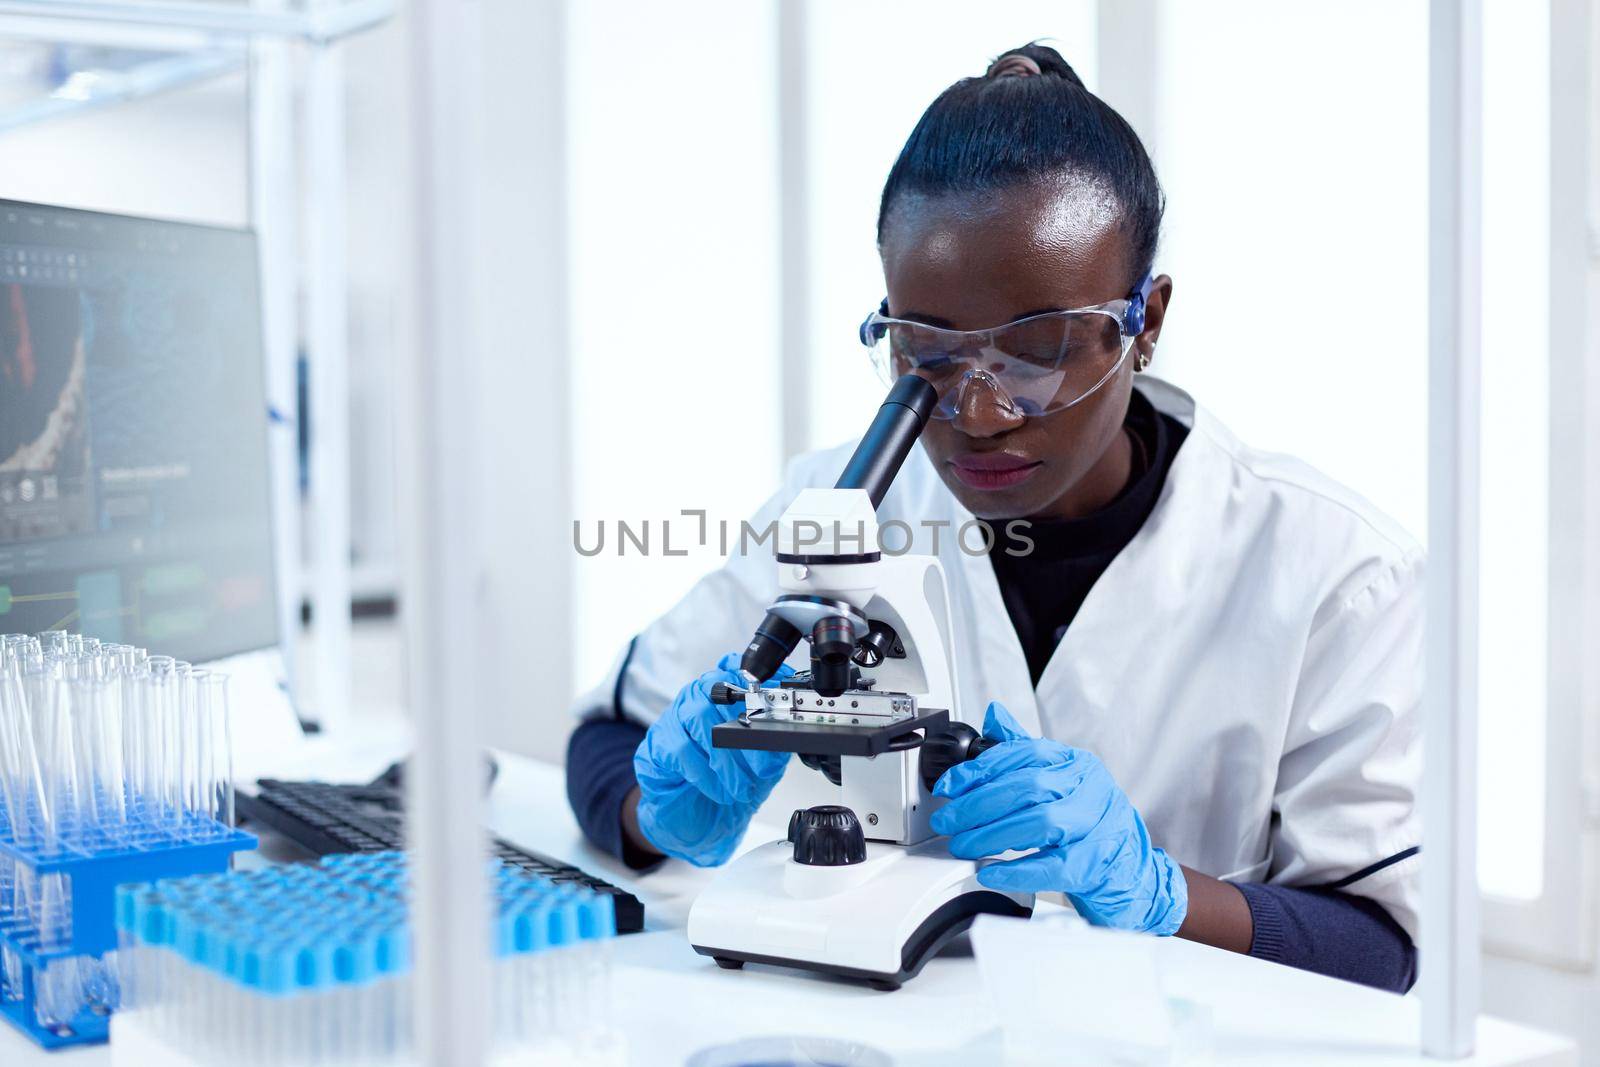 African chemist doing investigation using microscope analysing sample on glass slide. Black healthcare scientist in biochemistry laboratory wearing sterile equipment.